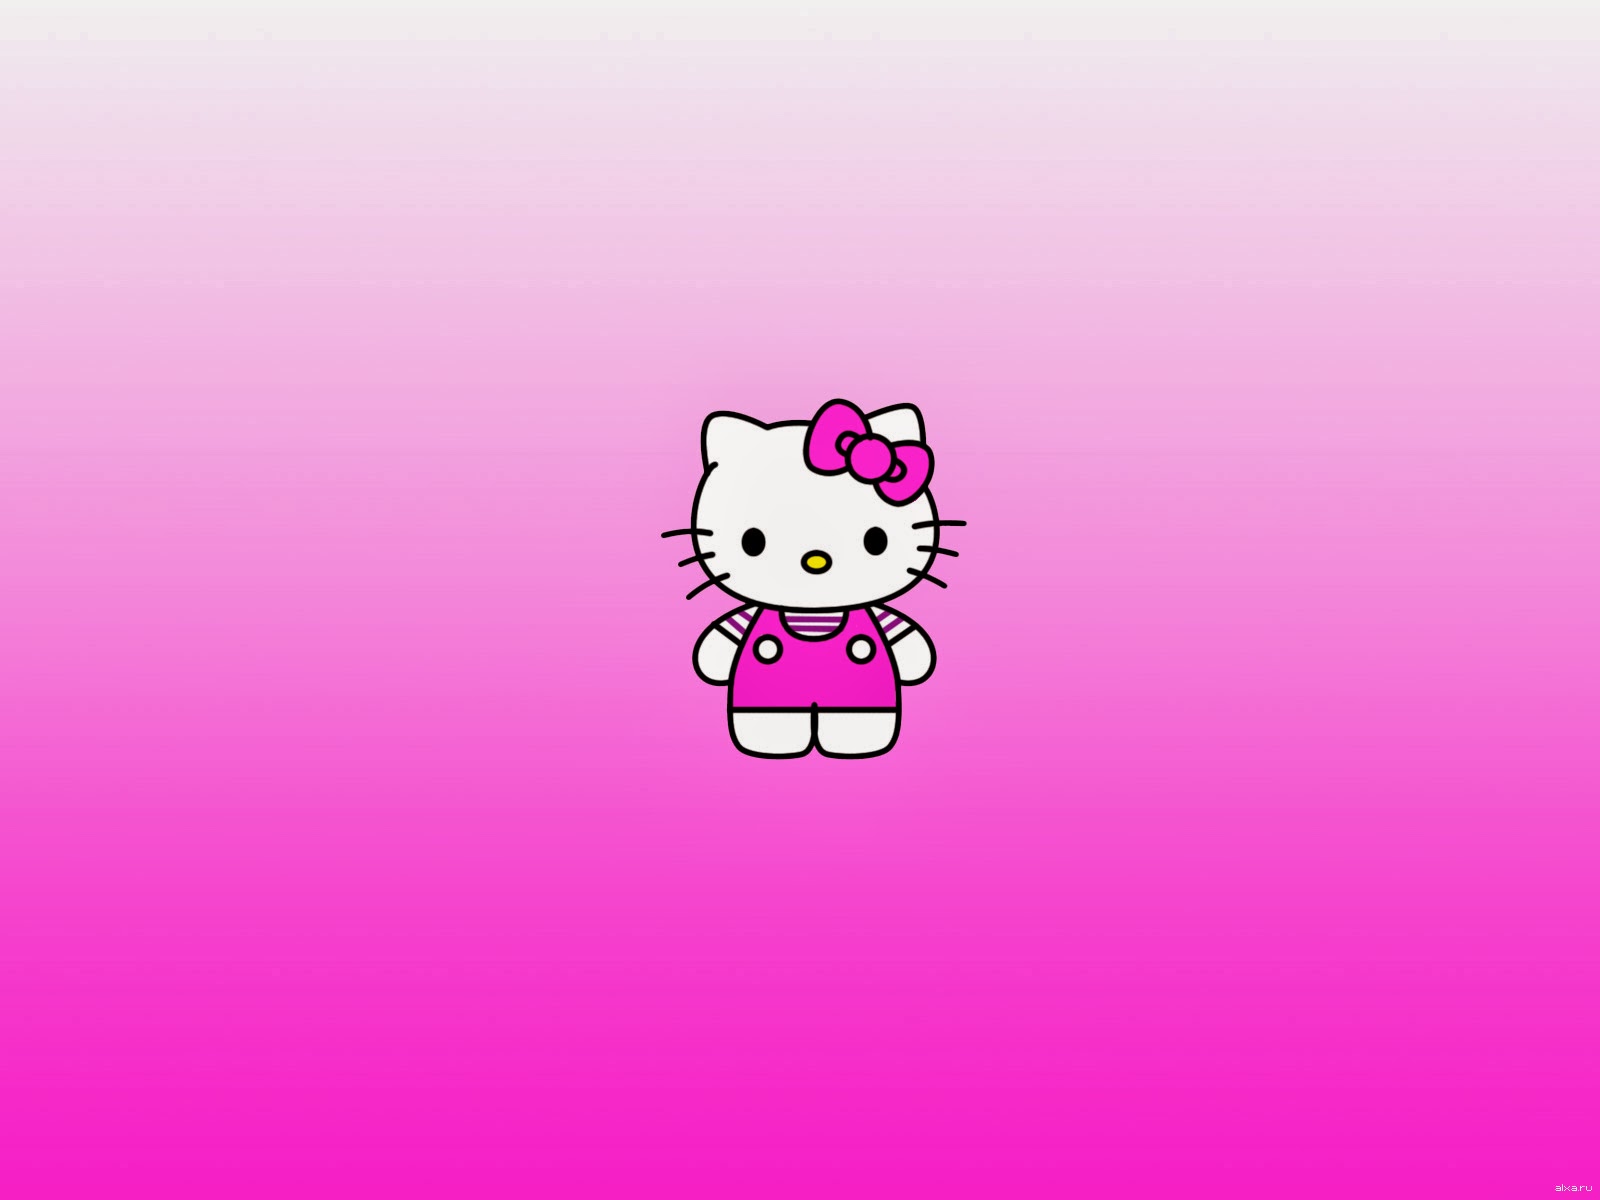 Cute Hello Kitty wallpapers   Beautiful wallpapers